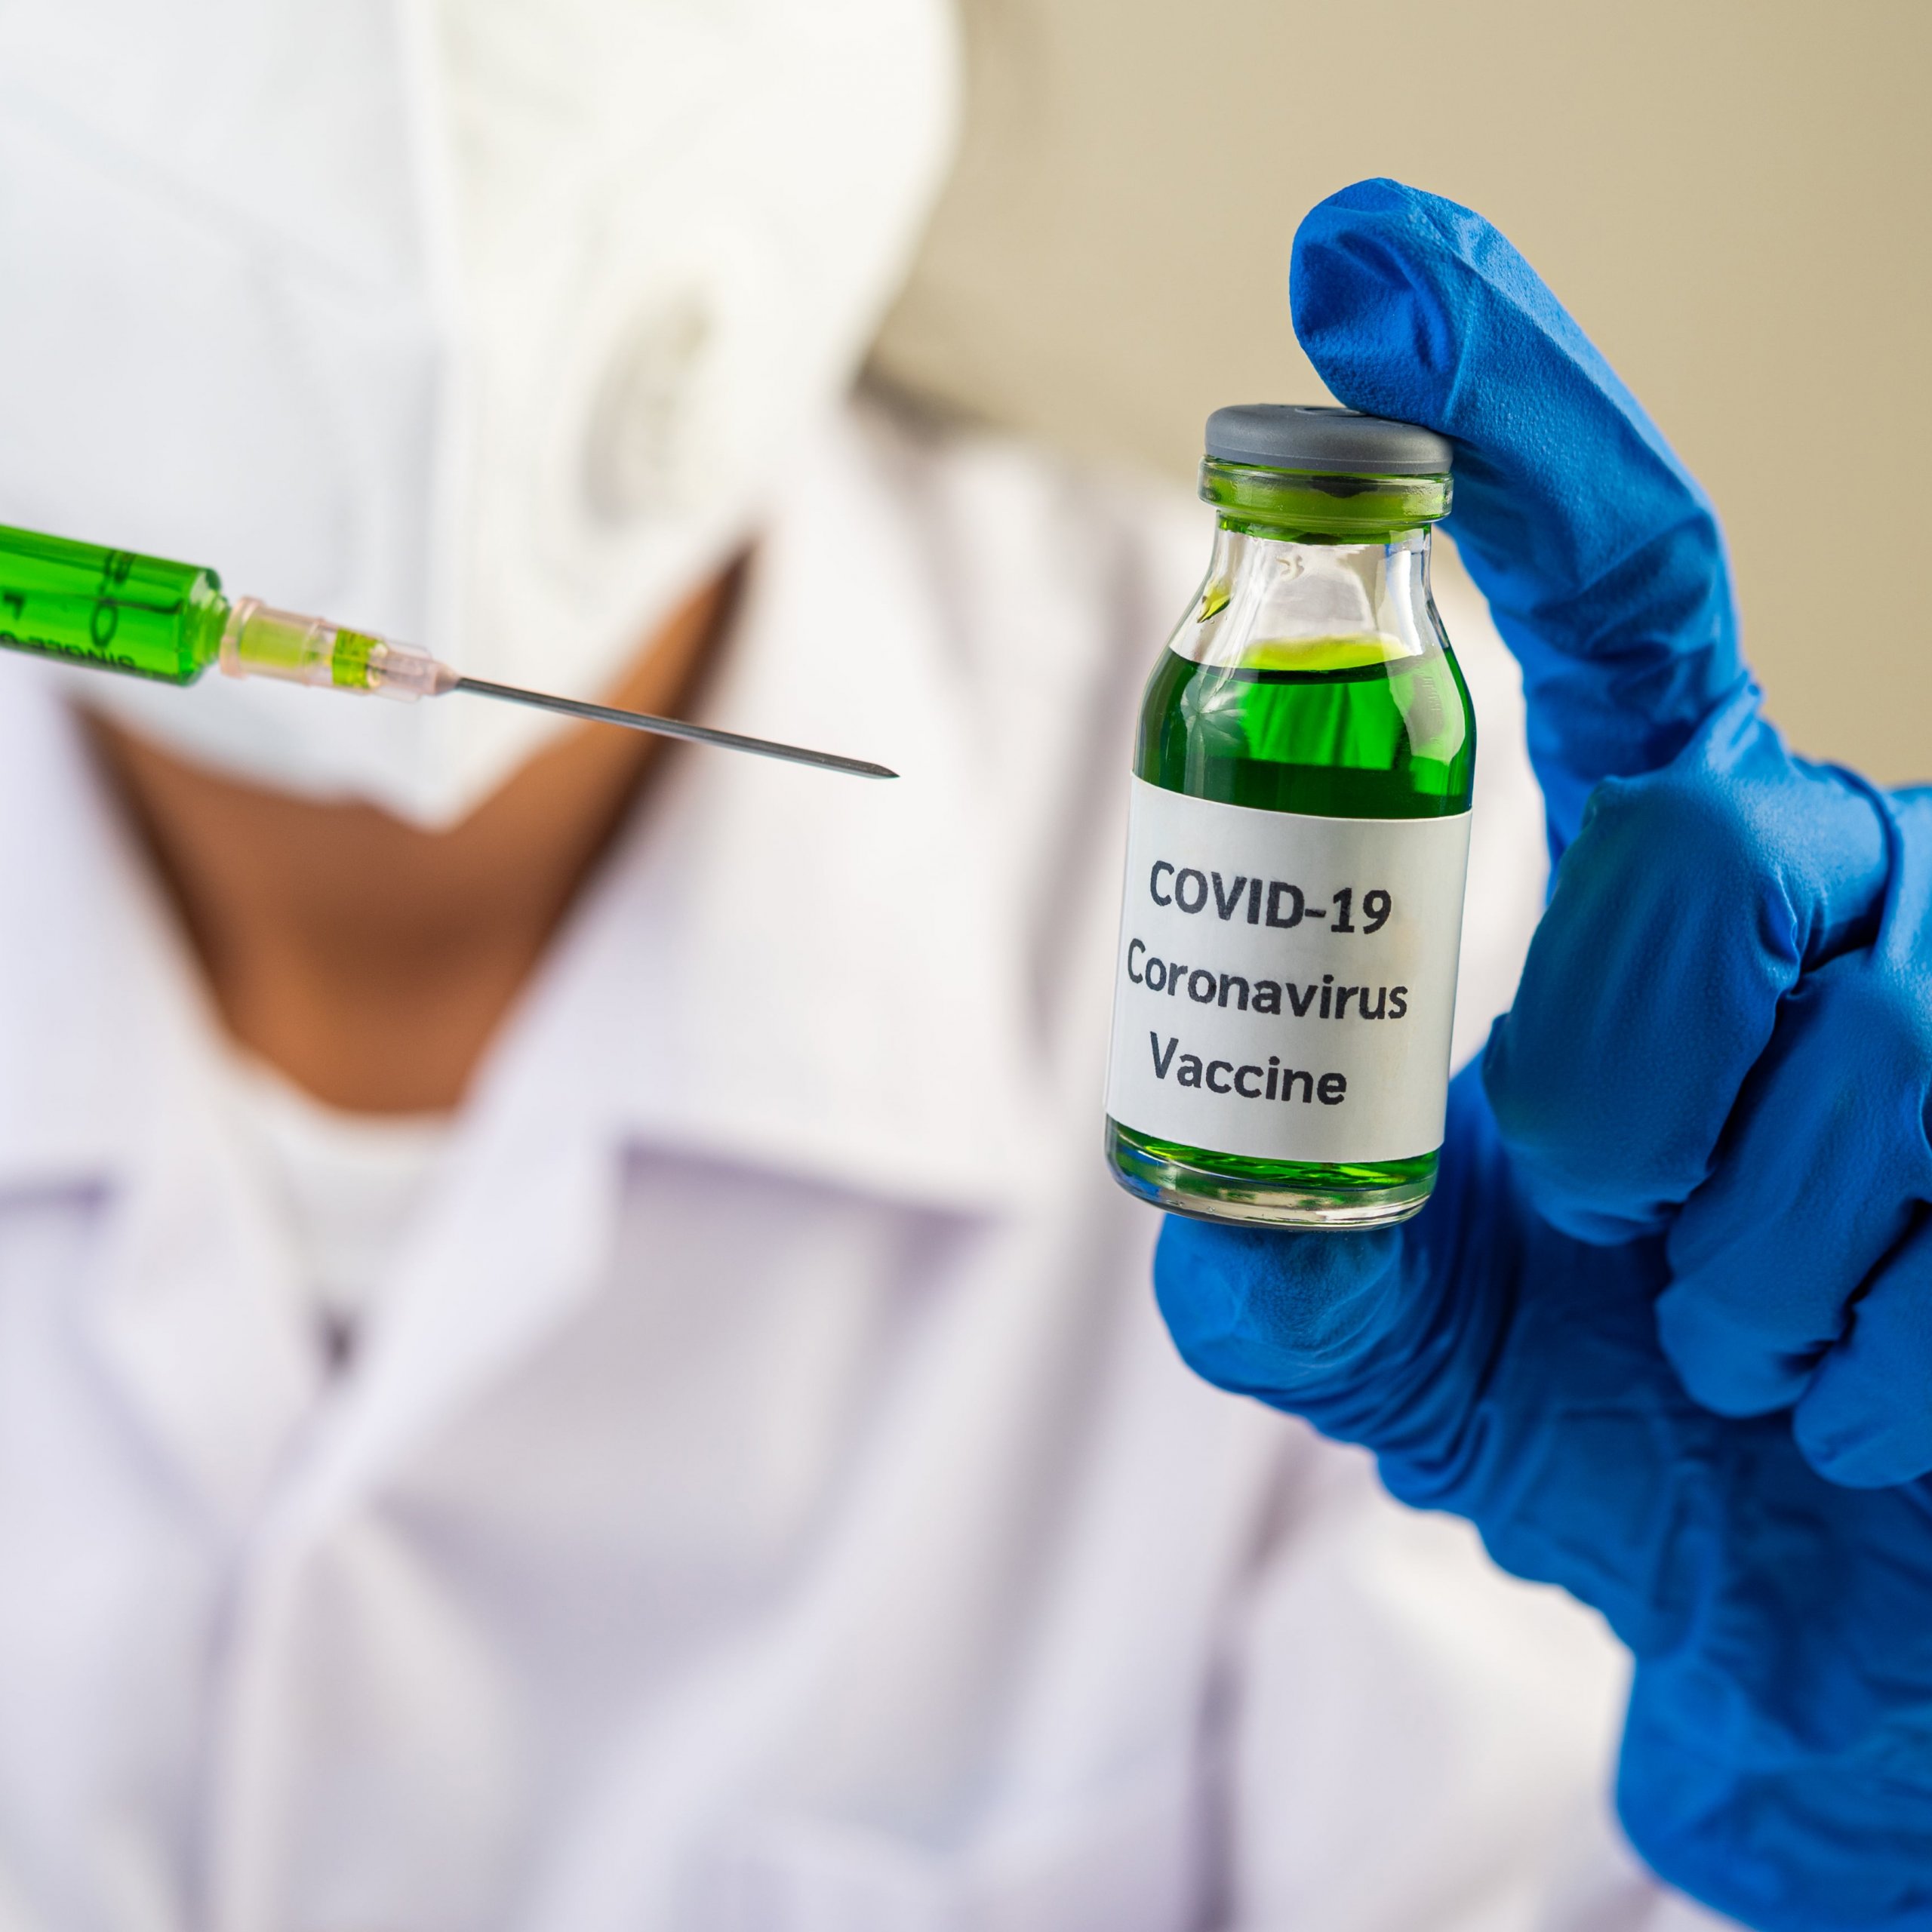 Confirmed COVID-19 cases surpass 9M - Where are we with the vaccine and drug development?